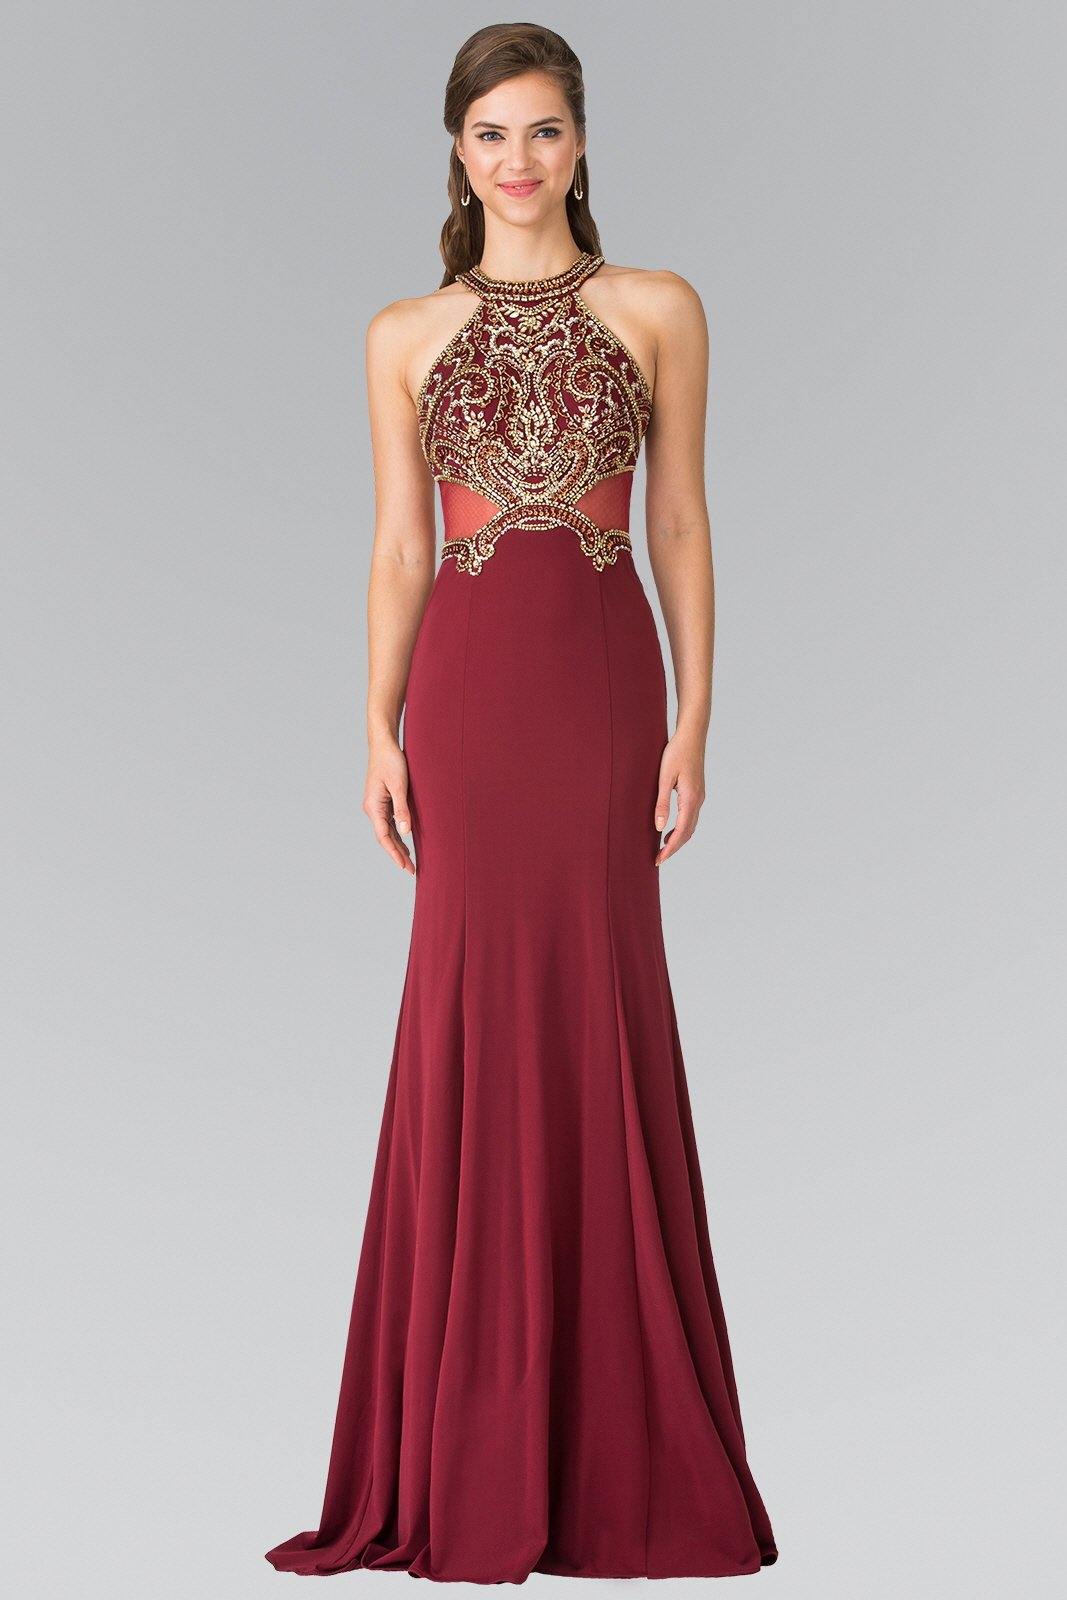 Long Prom Fitted Dress Sale | The Dress Outlet